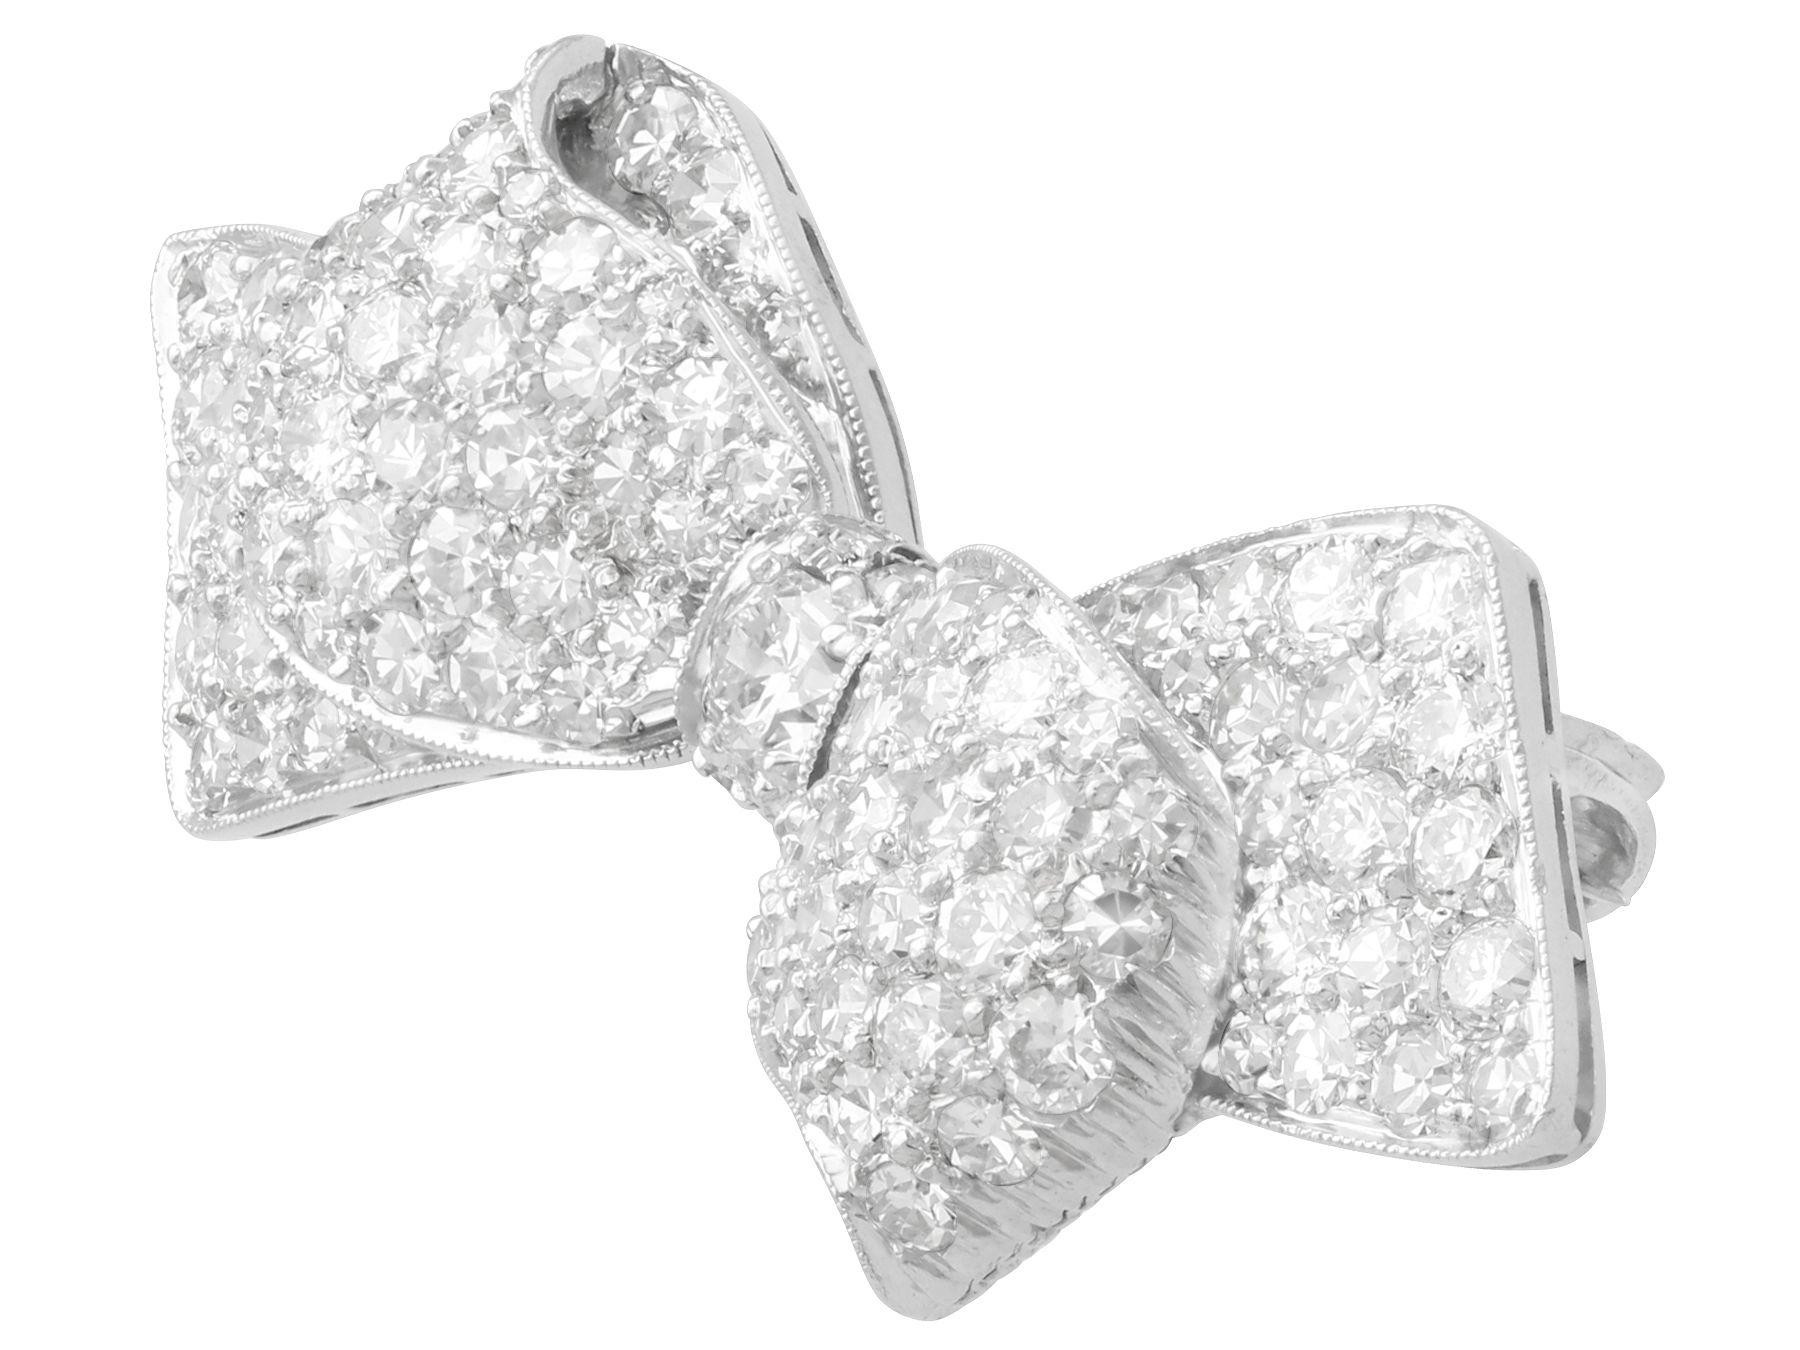 Antique 1.99 Carat Diamond and Platinum Bow Brooch Circa 1900 In Excellent Condition For Sale In Jesmond, Newcastle Upon Tyne